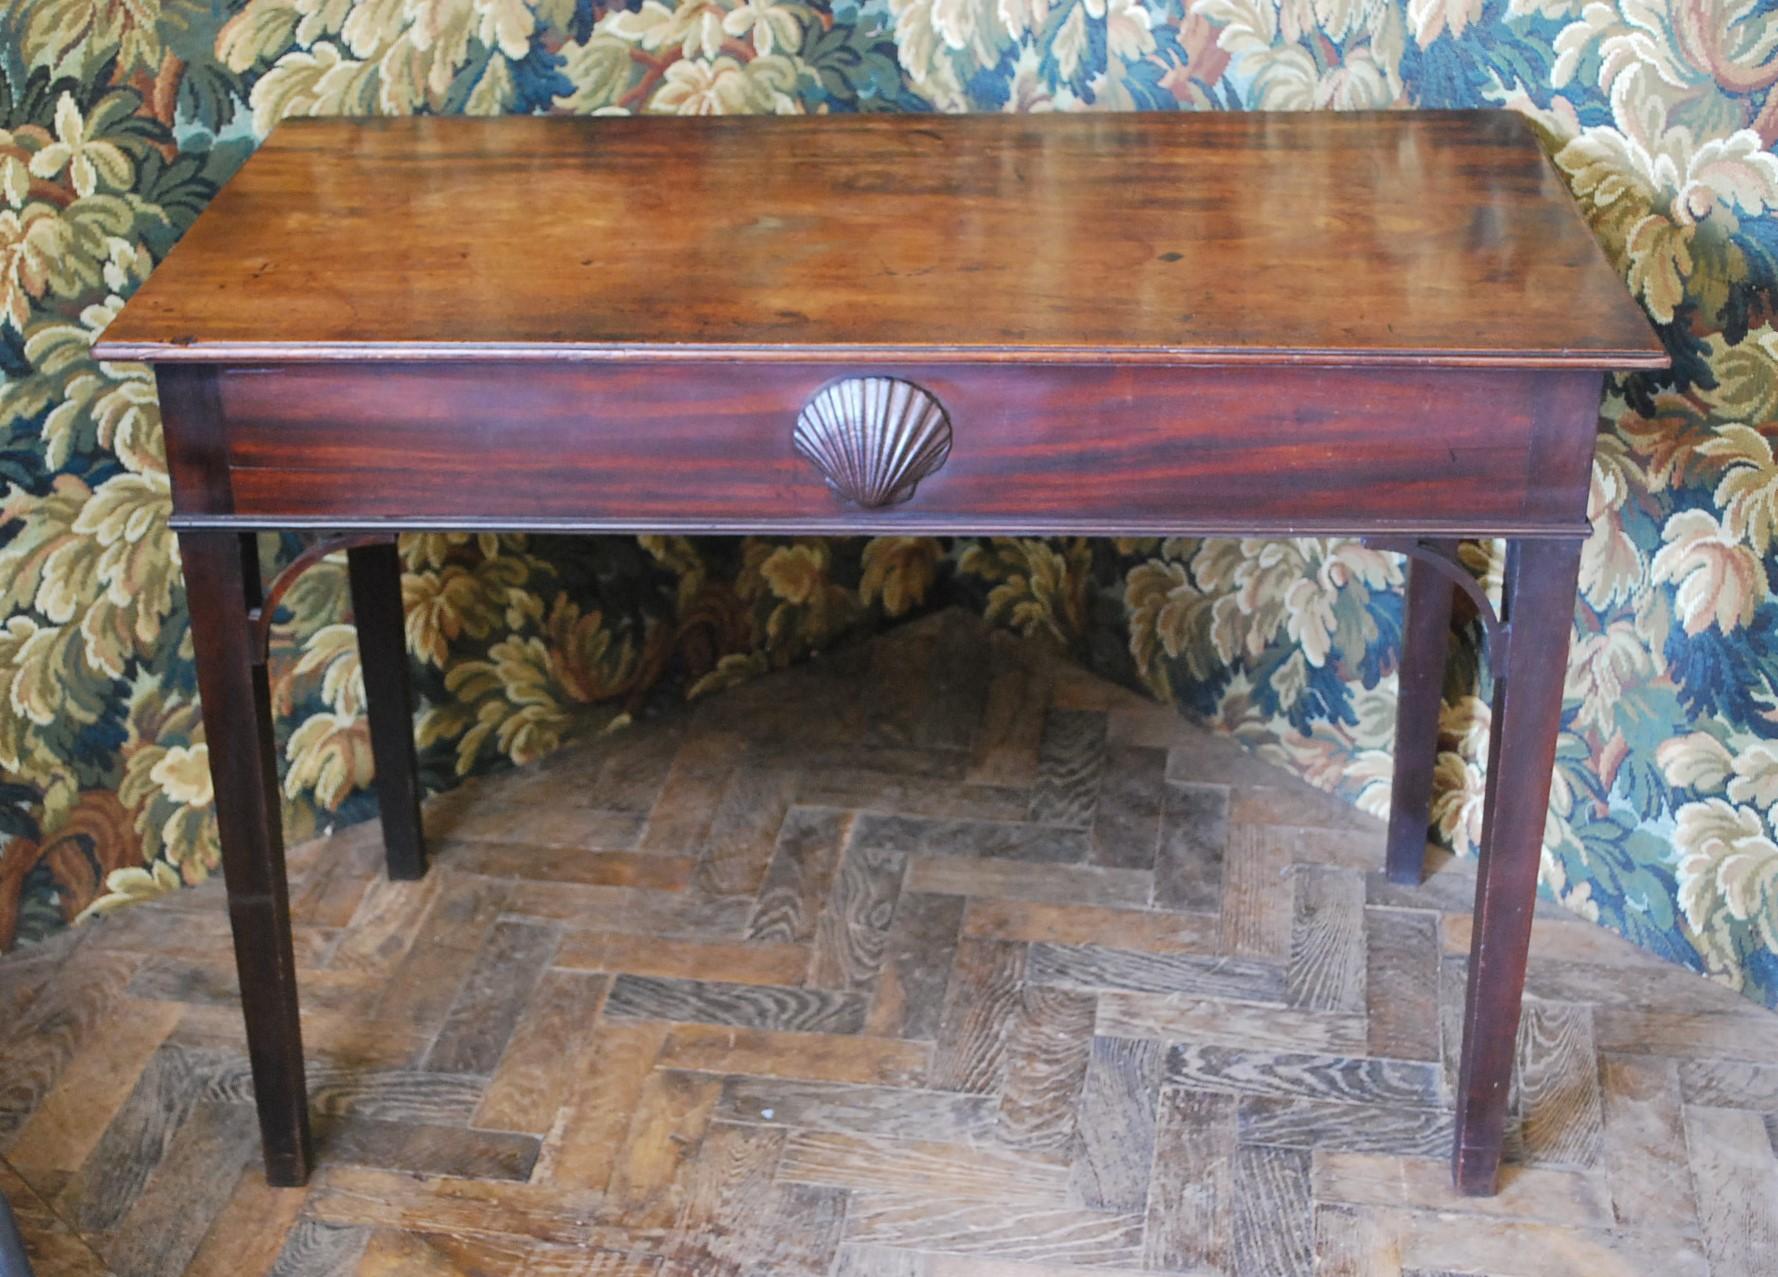 Hutton-Clarke Antiques takes pride in presenting a charming Irish Mahogany Side Table, dating back to approximately 1770. This exquisite piece reflects the enduring influence of the Chippendale style, featuring open brackets and drawers at either